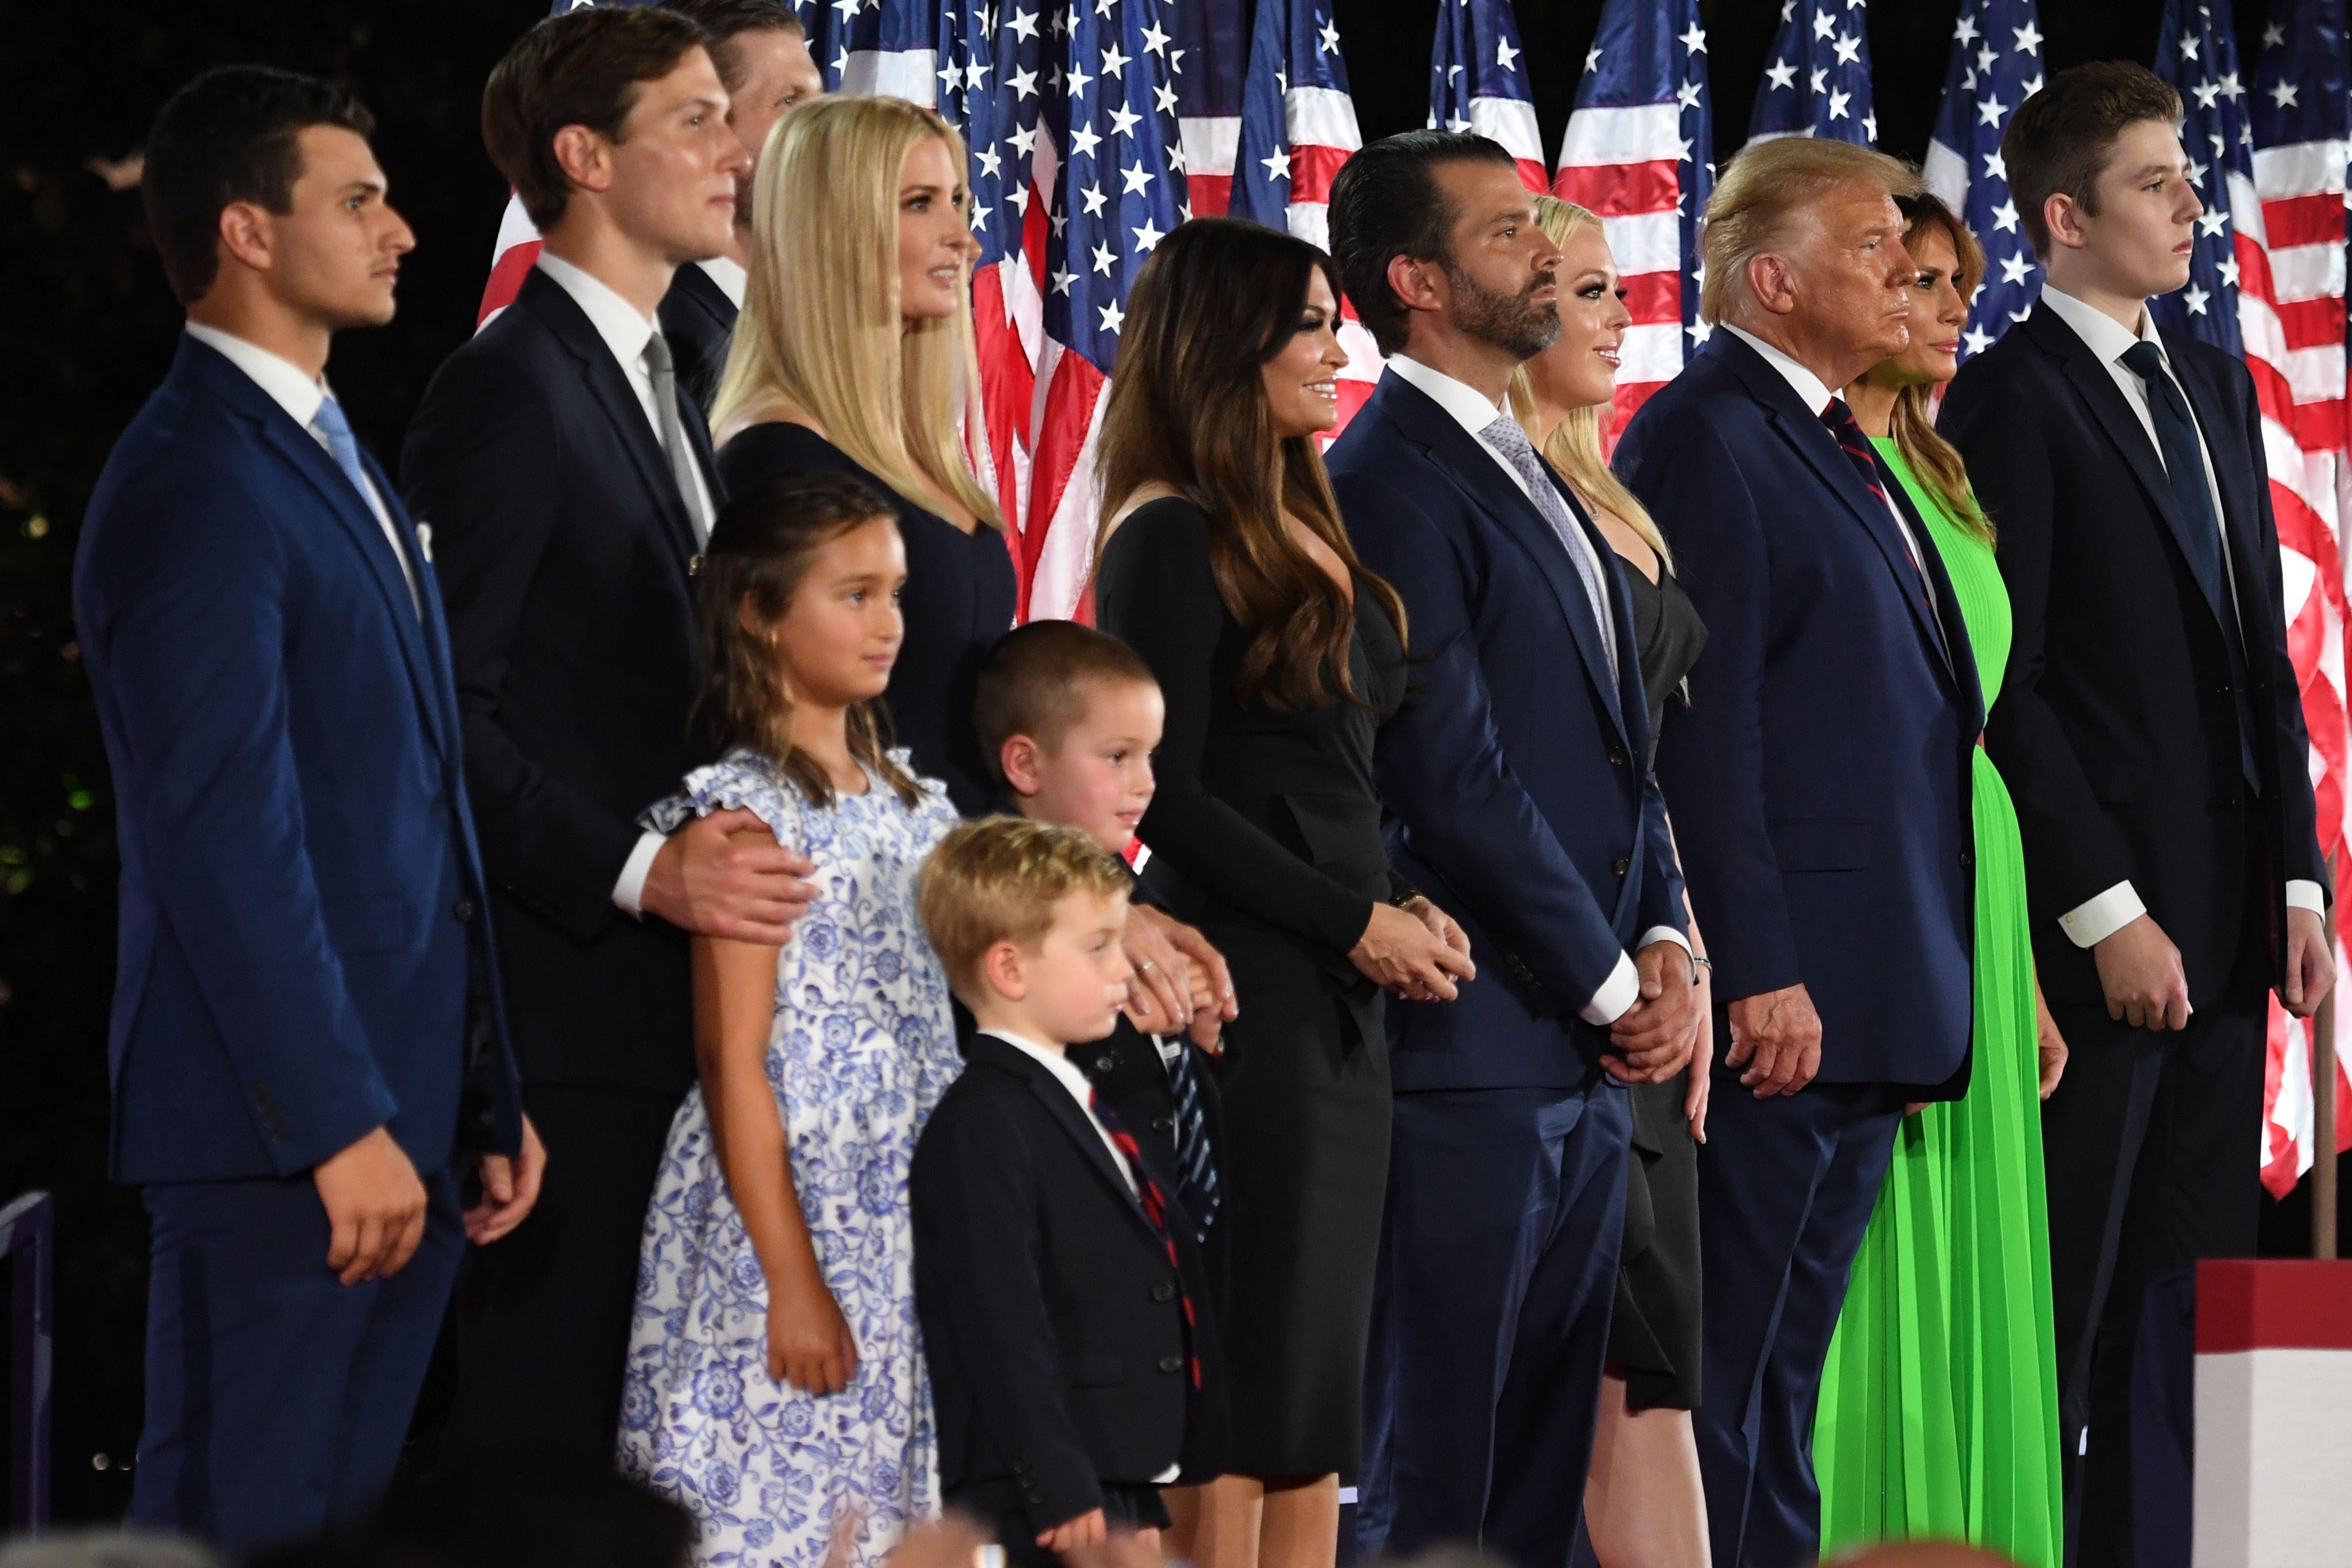 The Trump family poses onstage at the 2020 RNC.